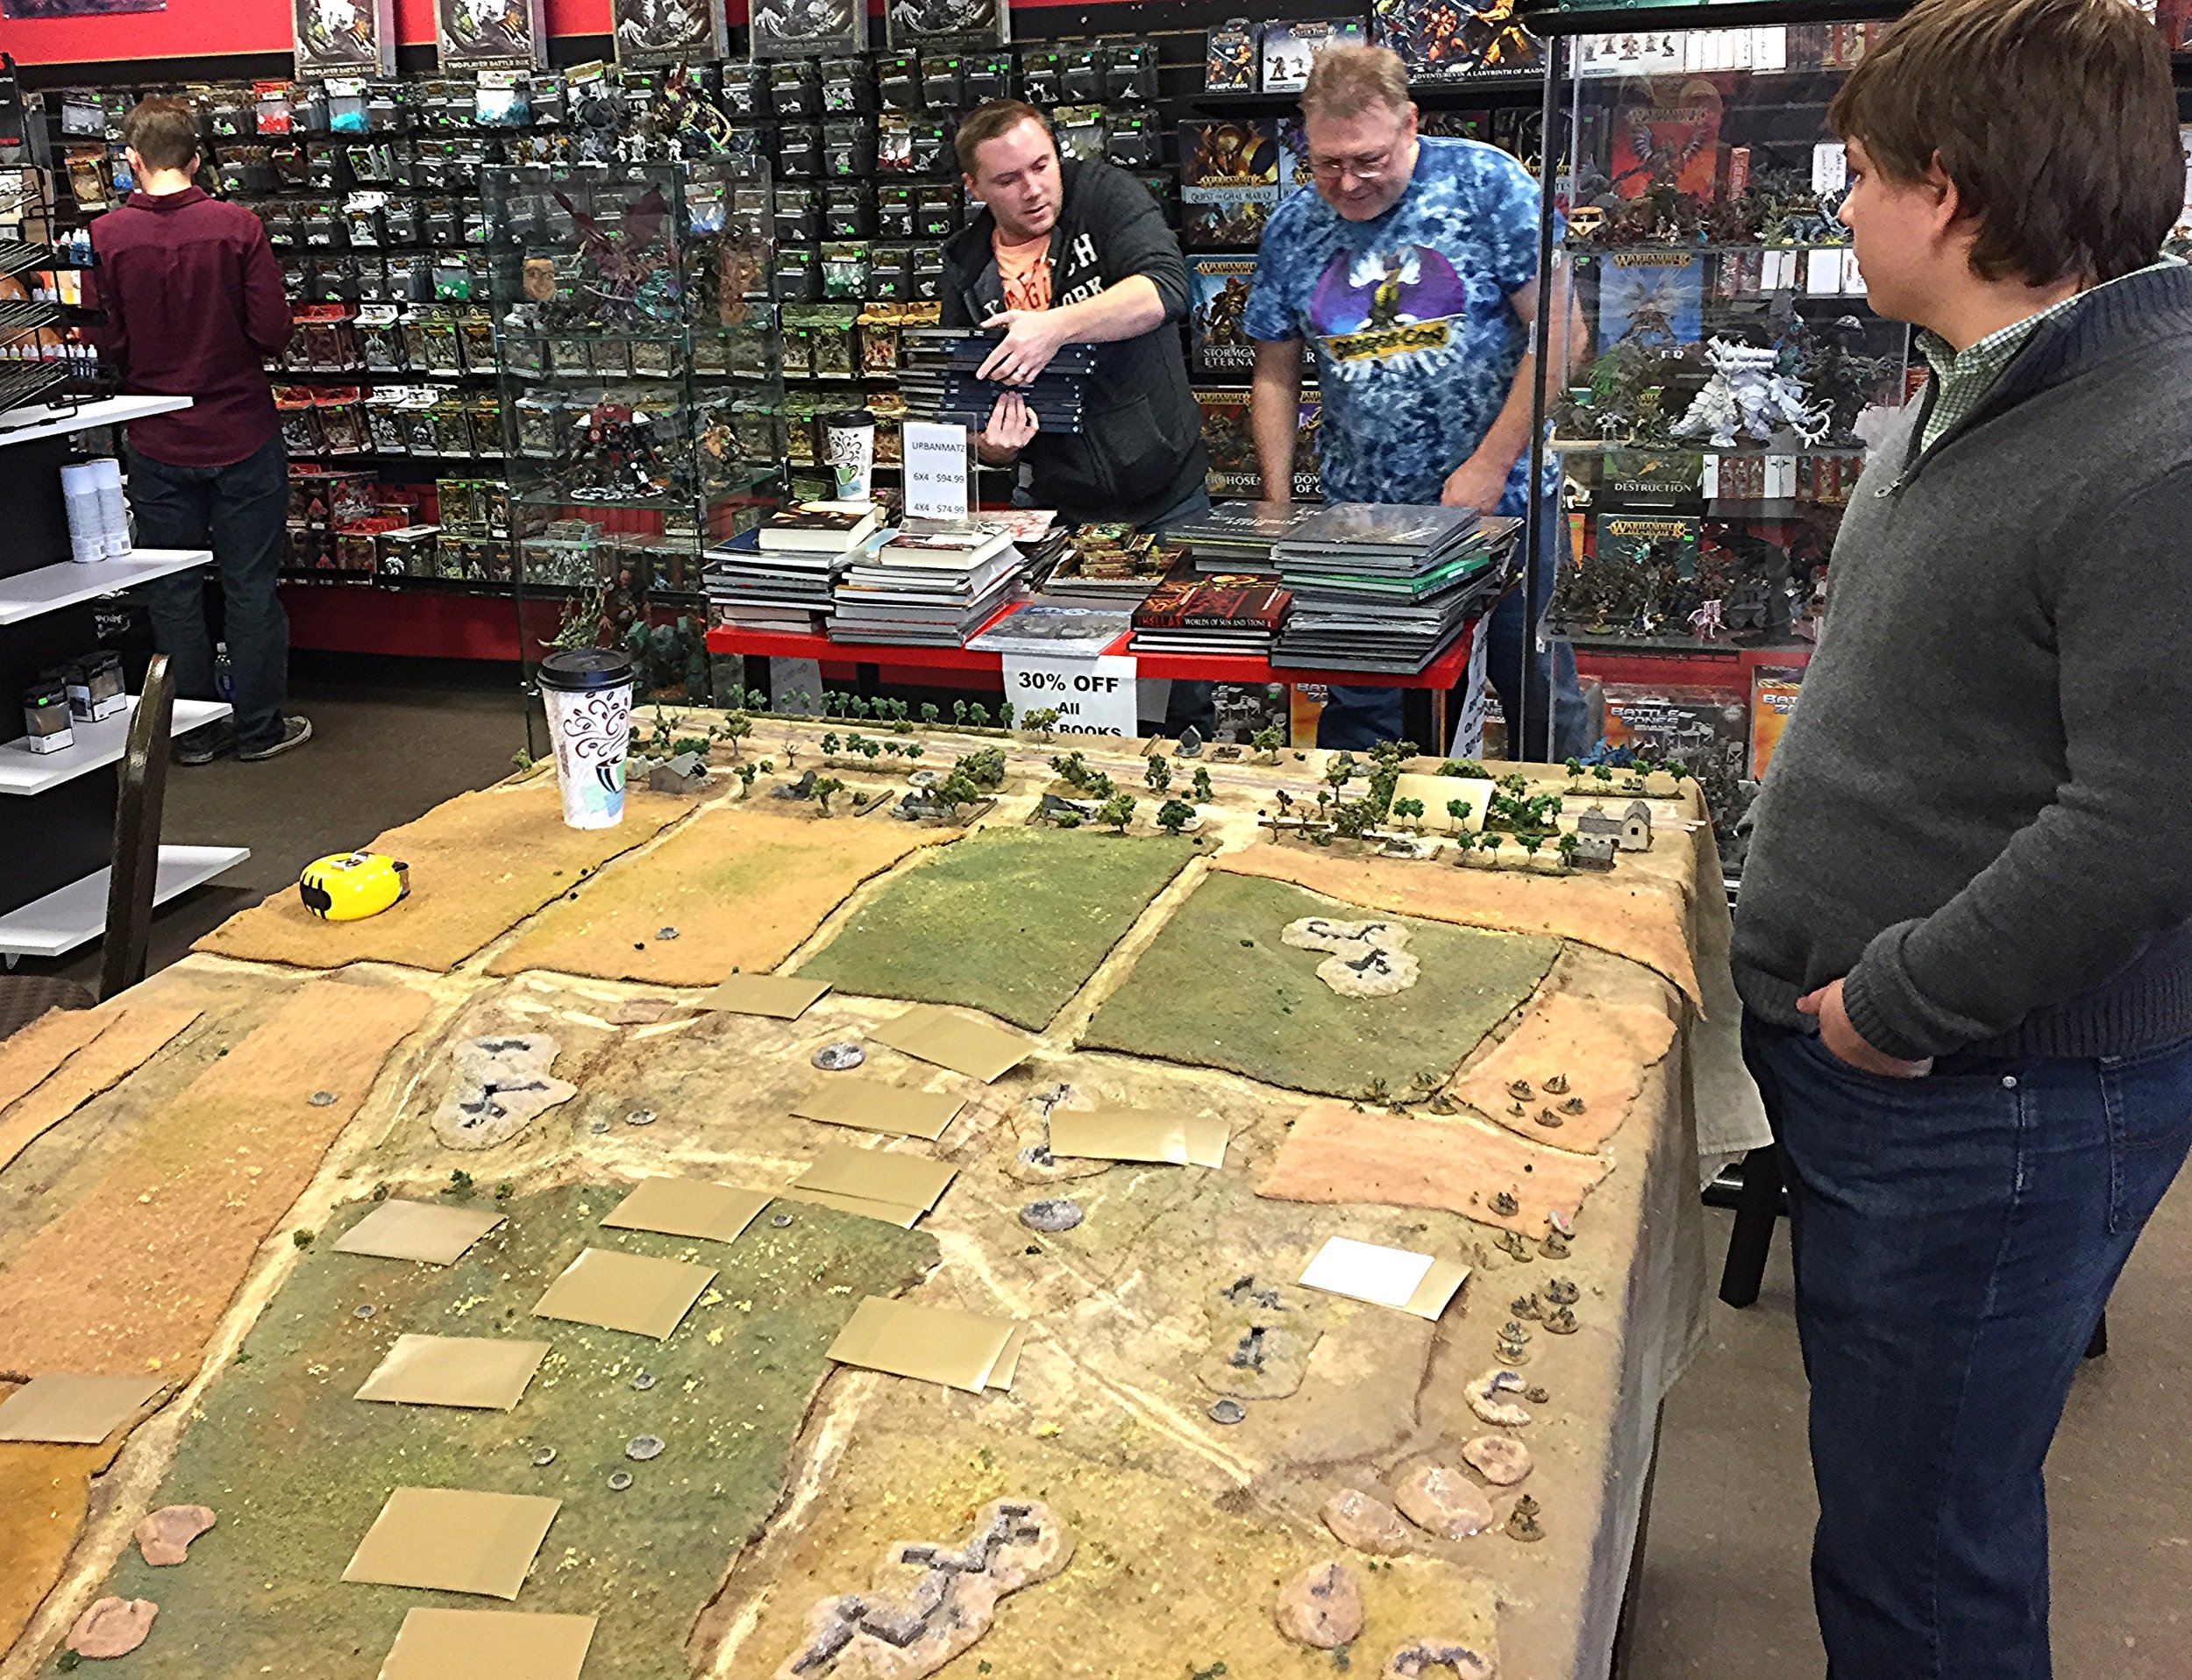  David (Gigabites owner) and Chris S discuss discounted RPG books while Jacob awaits the Soviet onslaught. 